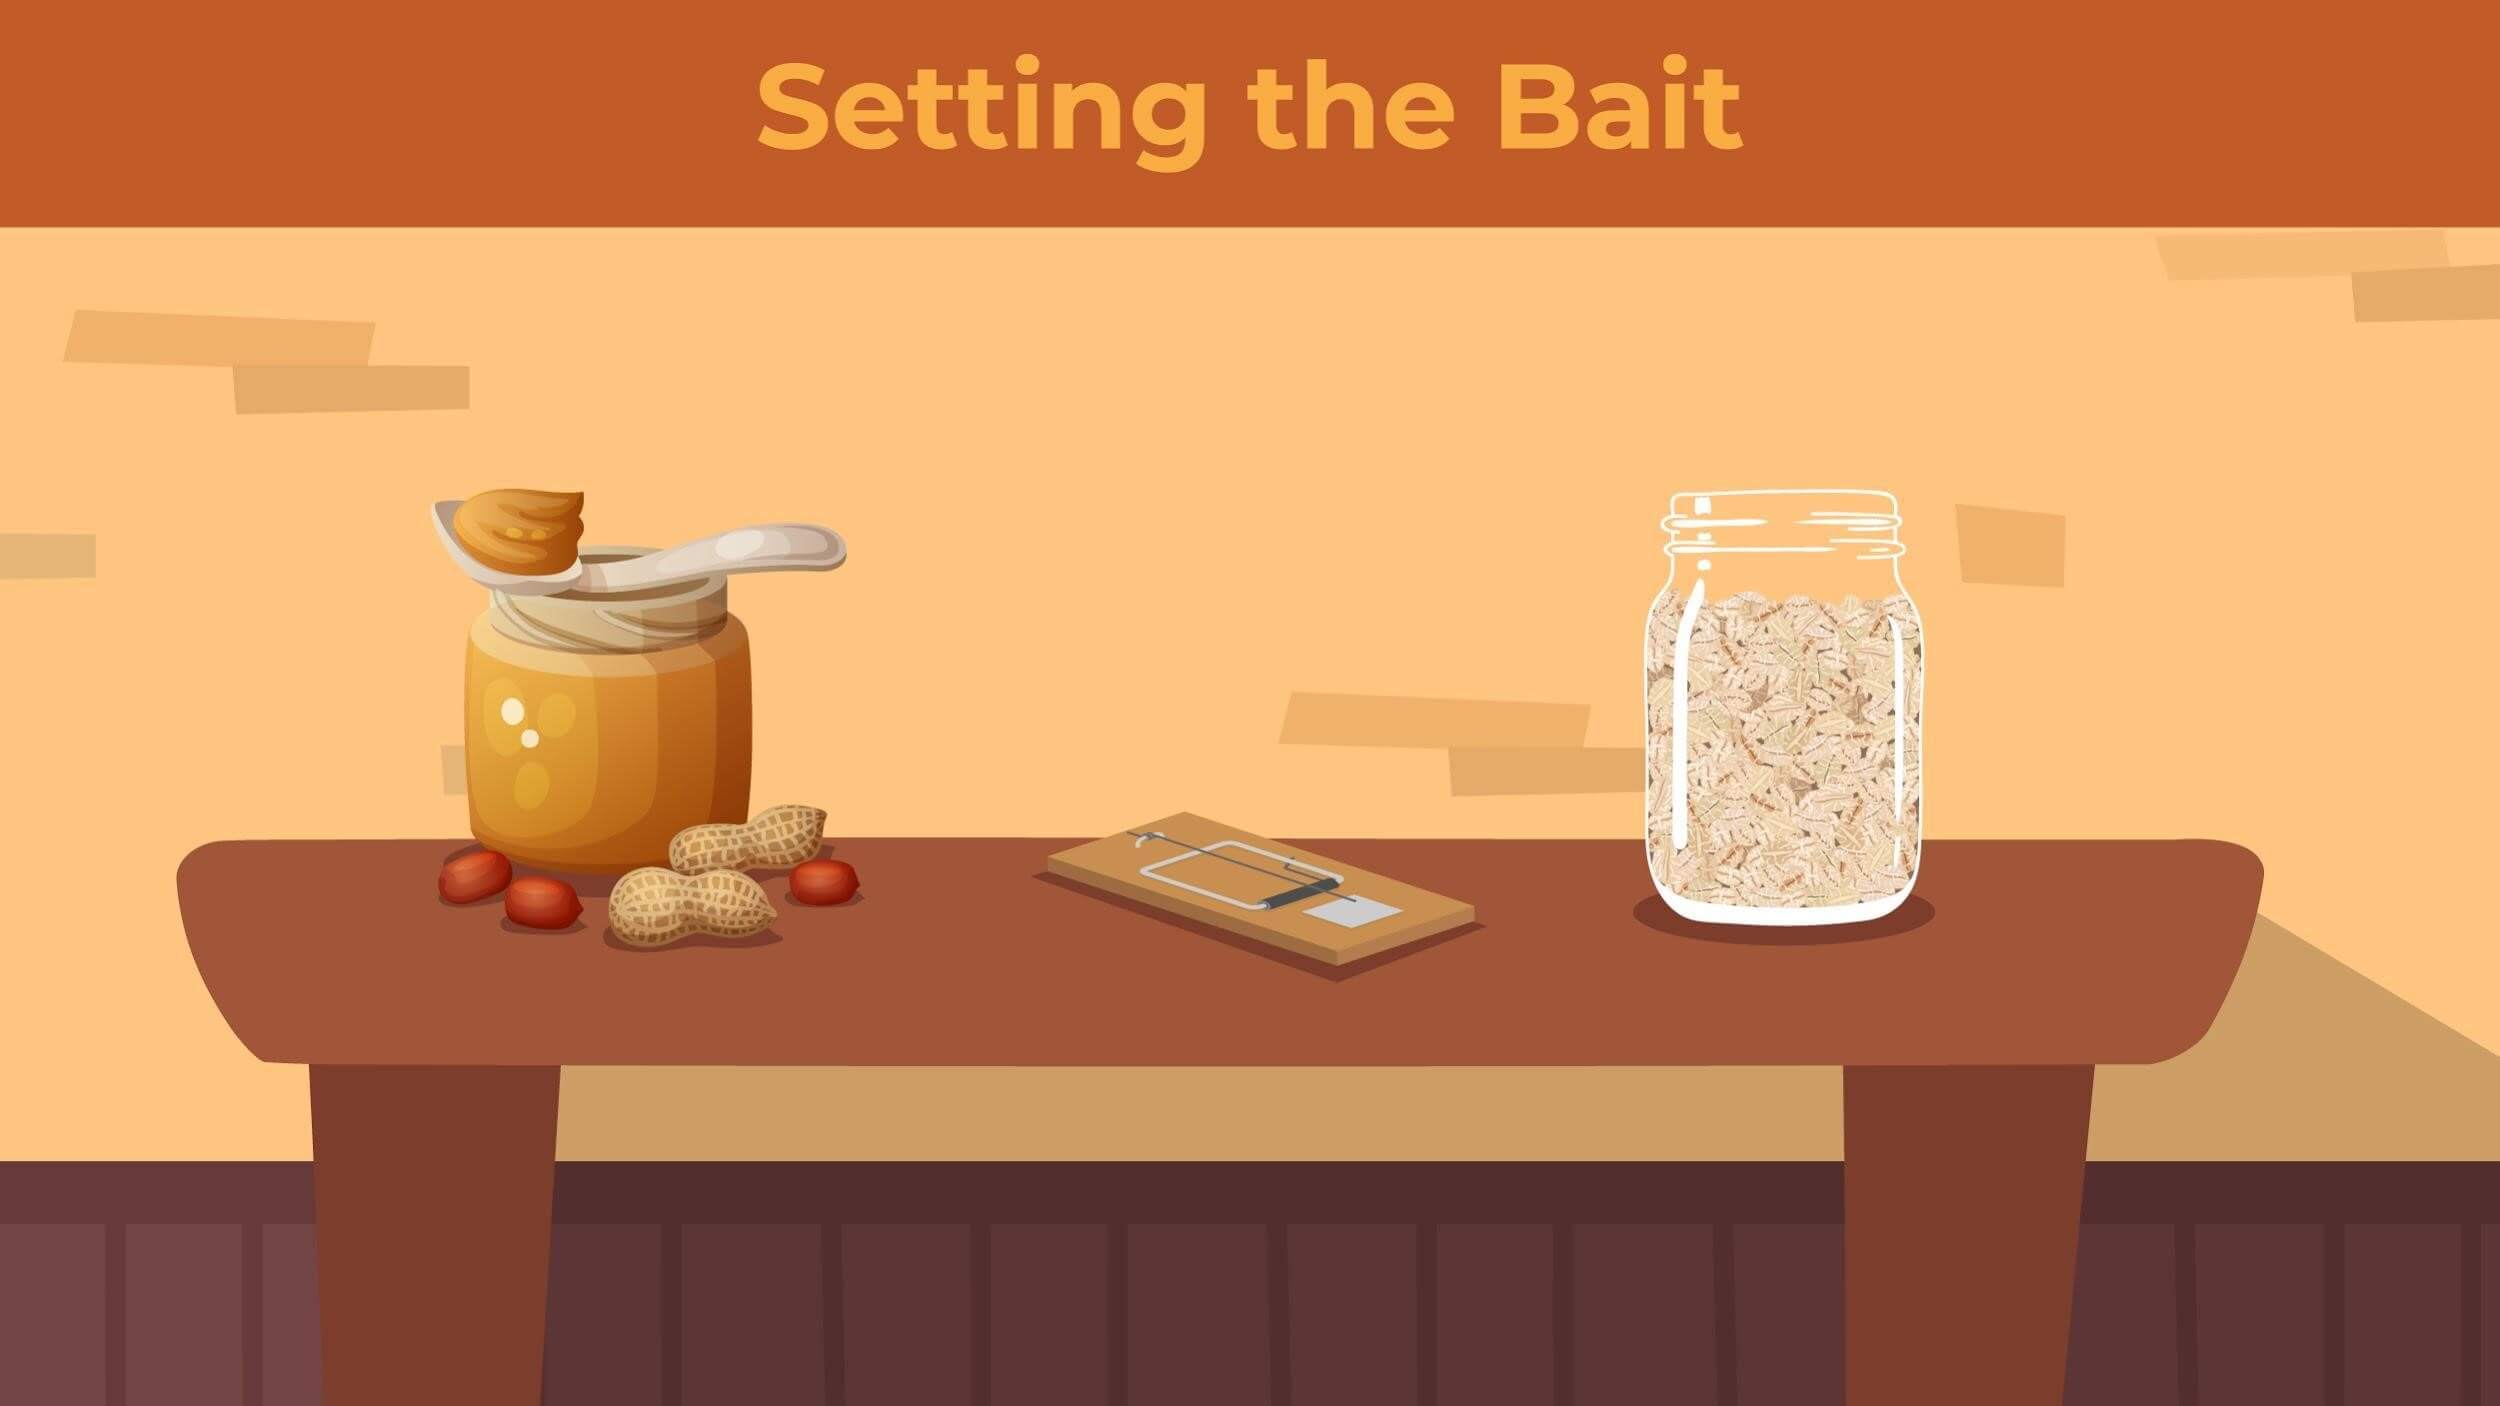 Illustration of peanut butter and dried oats sitting next to a snap trap on a table.